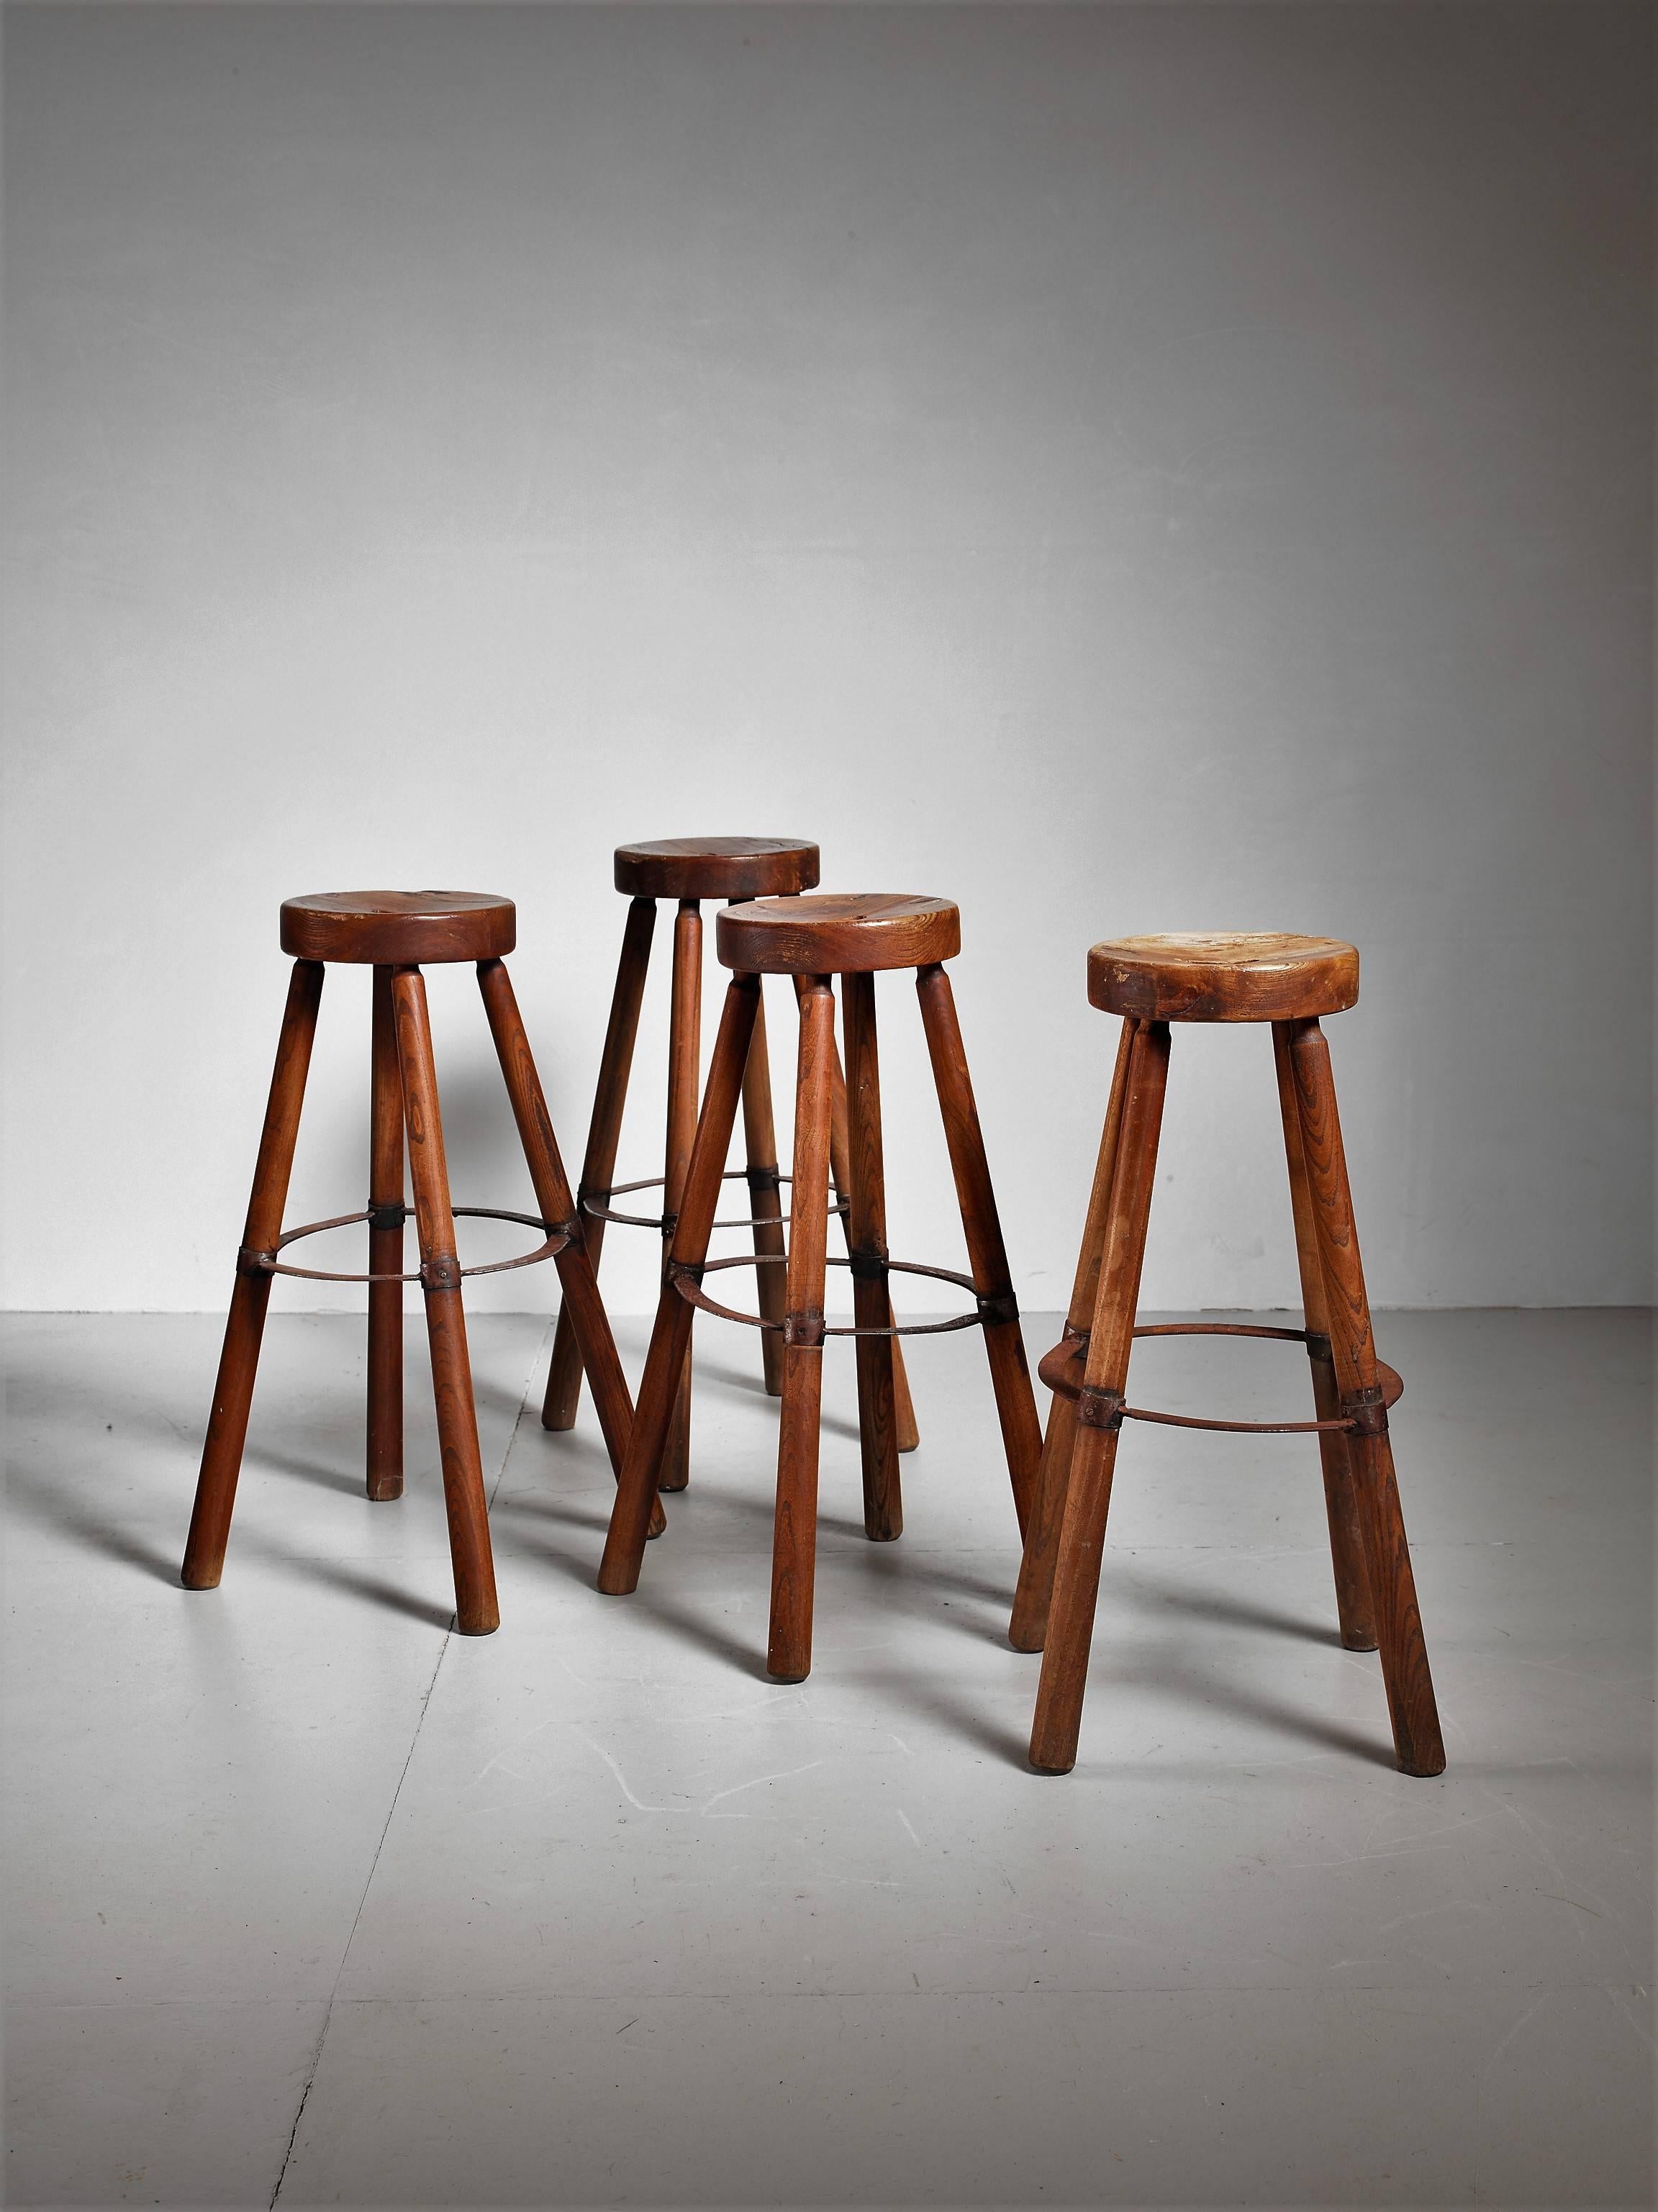 A set of four modernist French high stools in the manner of Pierre Jeanneret, made of teak with a metal foot ring. The thick top has a diameter of 27 cm (10.5 inch) and has a slot in it. These pieces have a sturdy, Industrial look and has a great